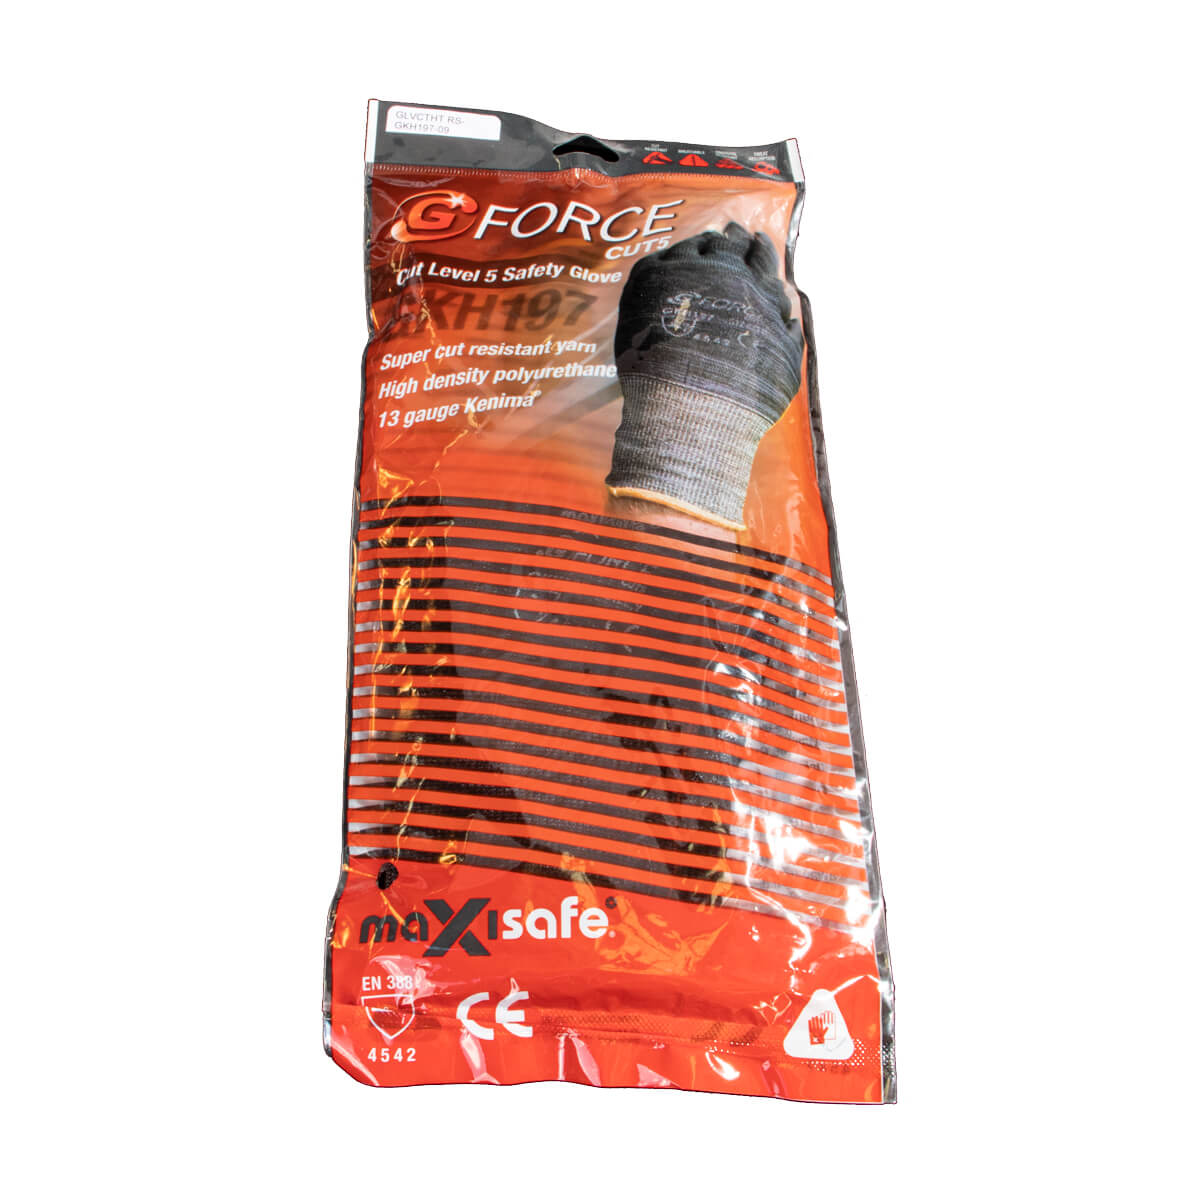 Gloves Cut & Heat Resistant Large MaxiSafe